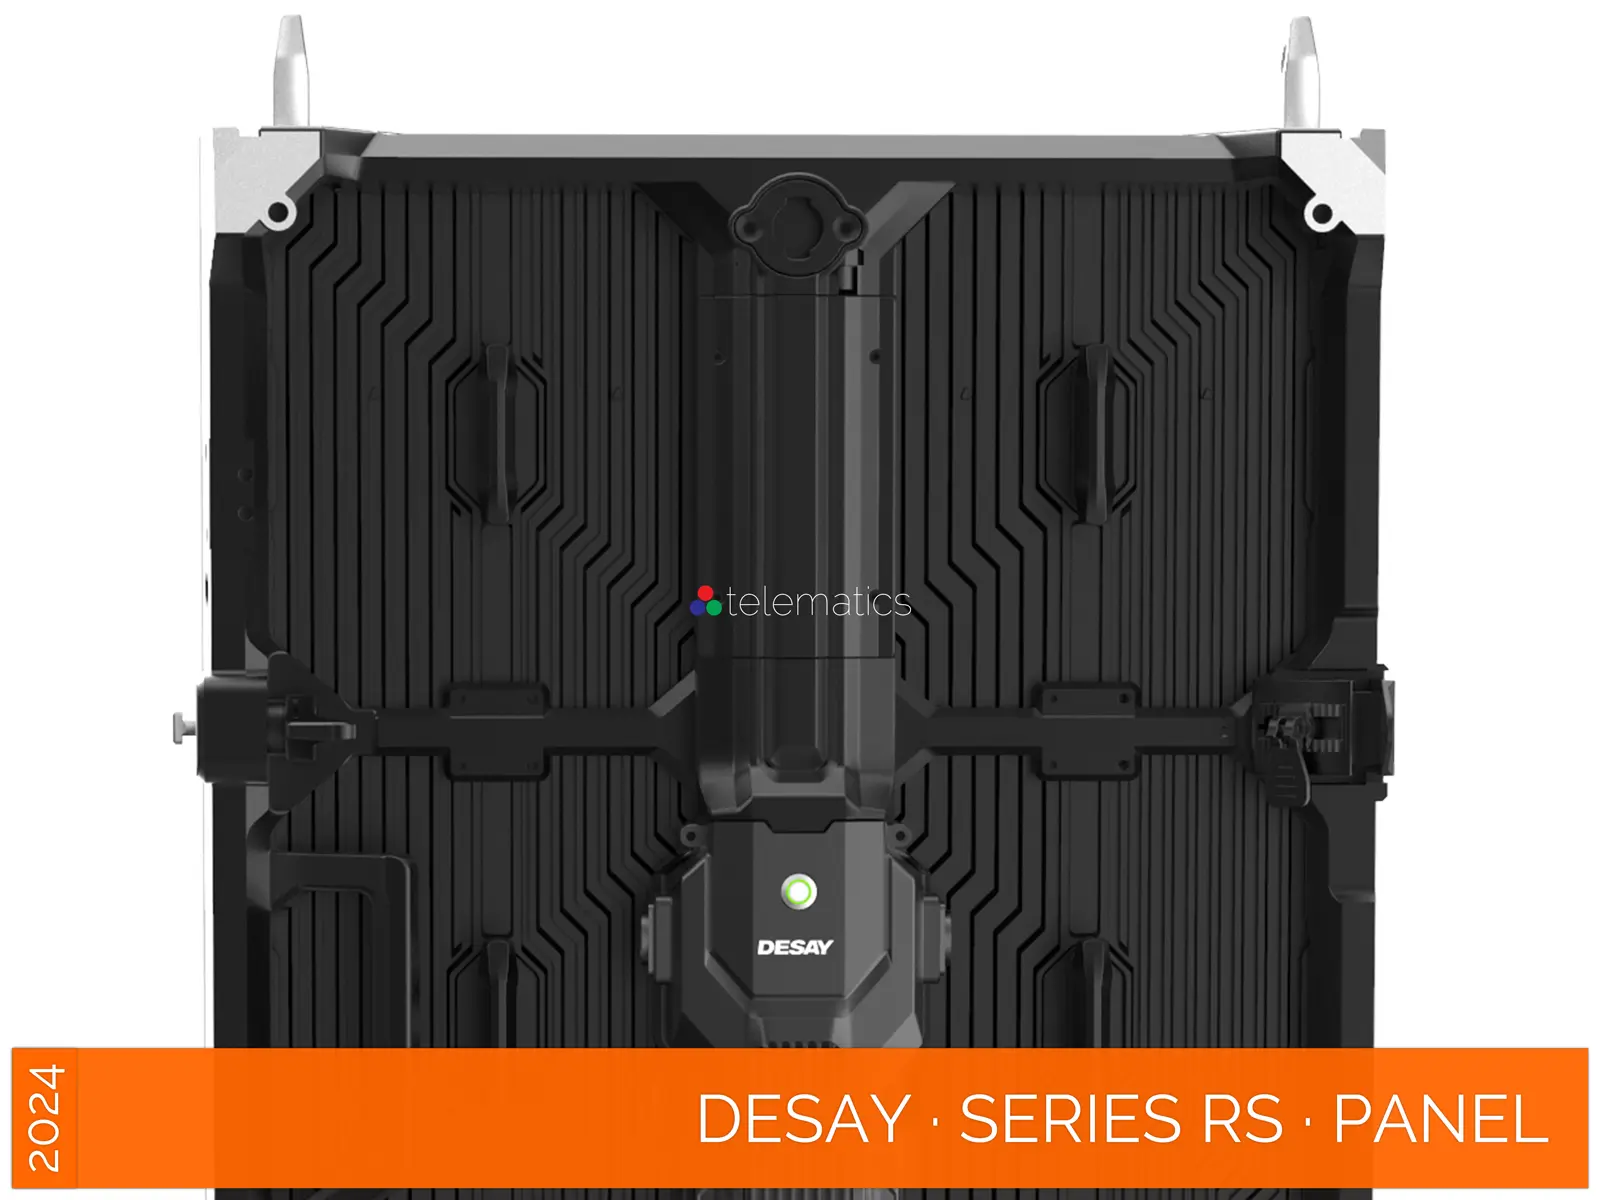 Desay · Series RS · Direct View LED Display Panel · Full Pixel Range · Rental Or Stage · Indoor Rated · Rapid Service And Setup · Robust Panel Build For Rental And Stage · NovaStar COEX MX CX · Vision Management Platform · Viplex · review · price · cost · priced from $1,790 per square meter